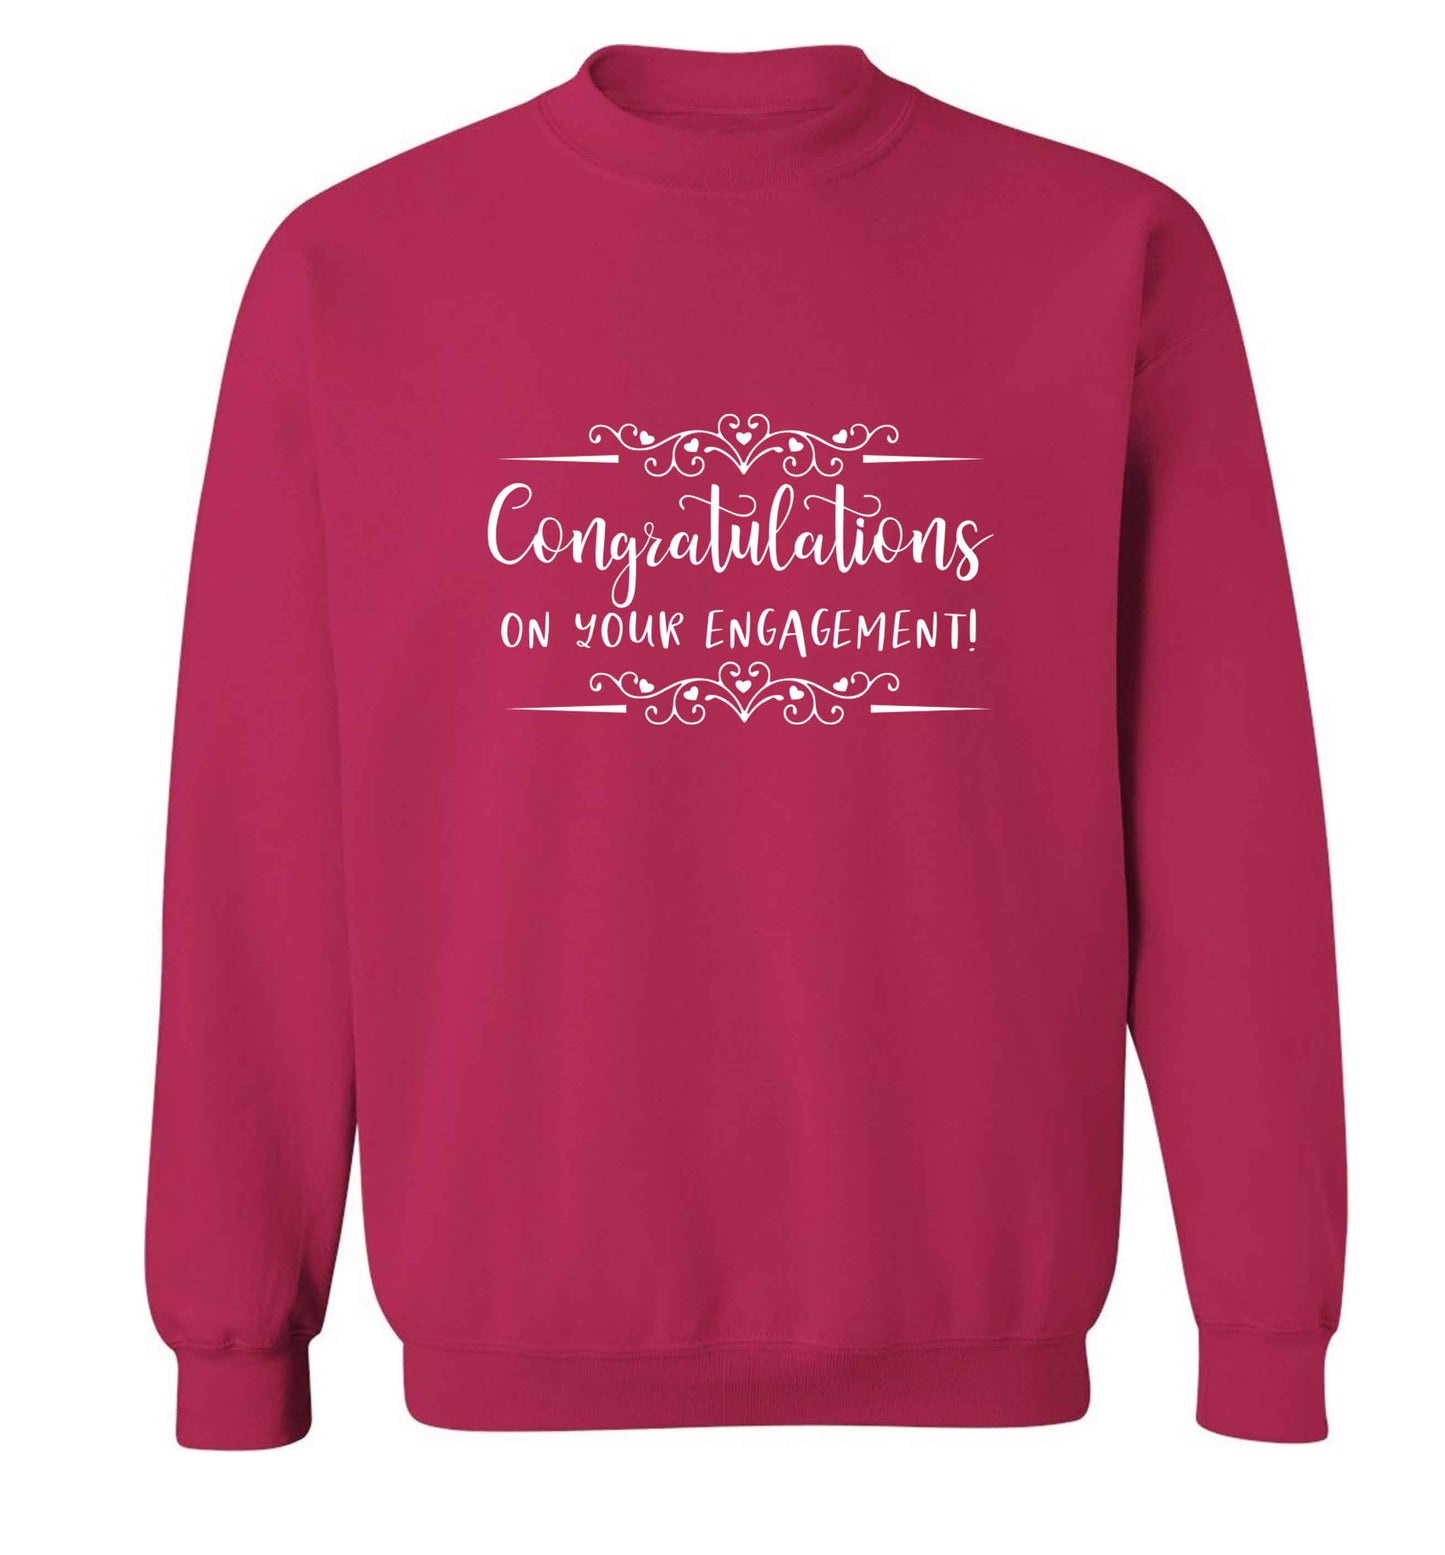 Congratulations on your engagement adult's unisex pink sweater 2XL